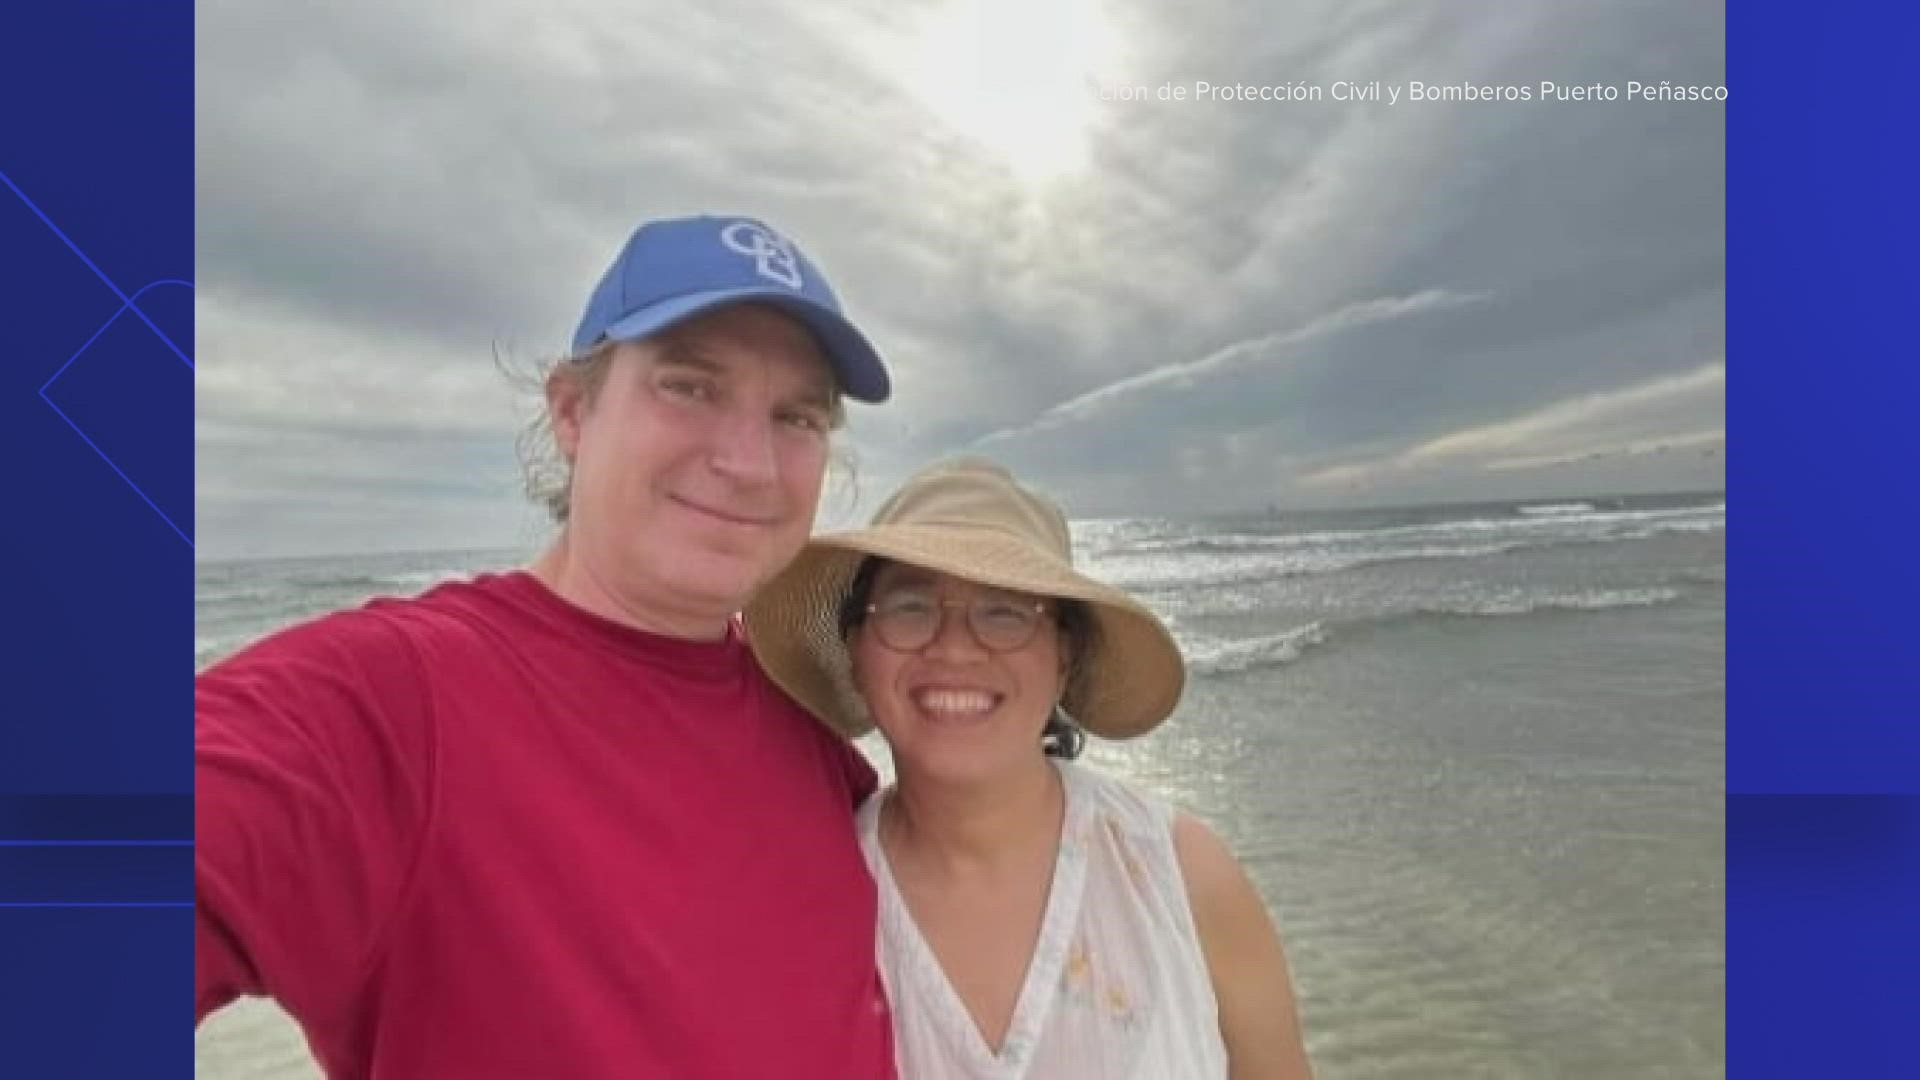 The couple reportedly went missing after strong winds made their return to shore impossible.